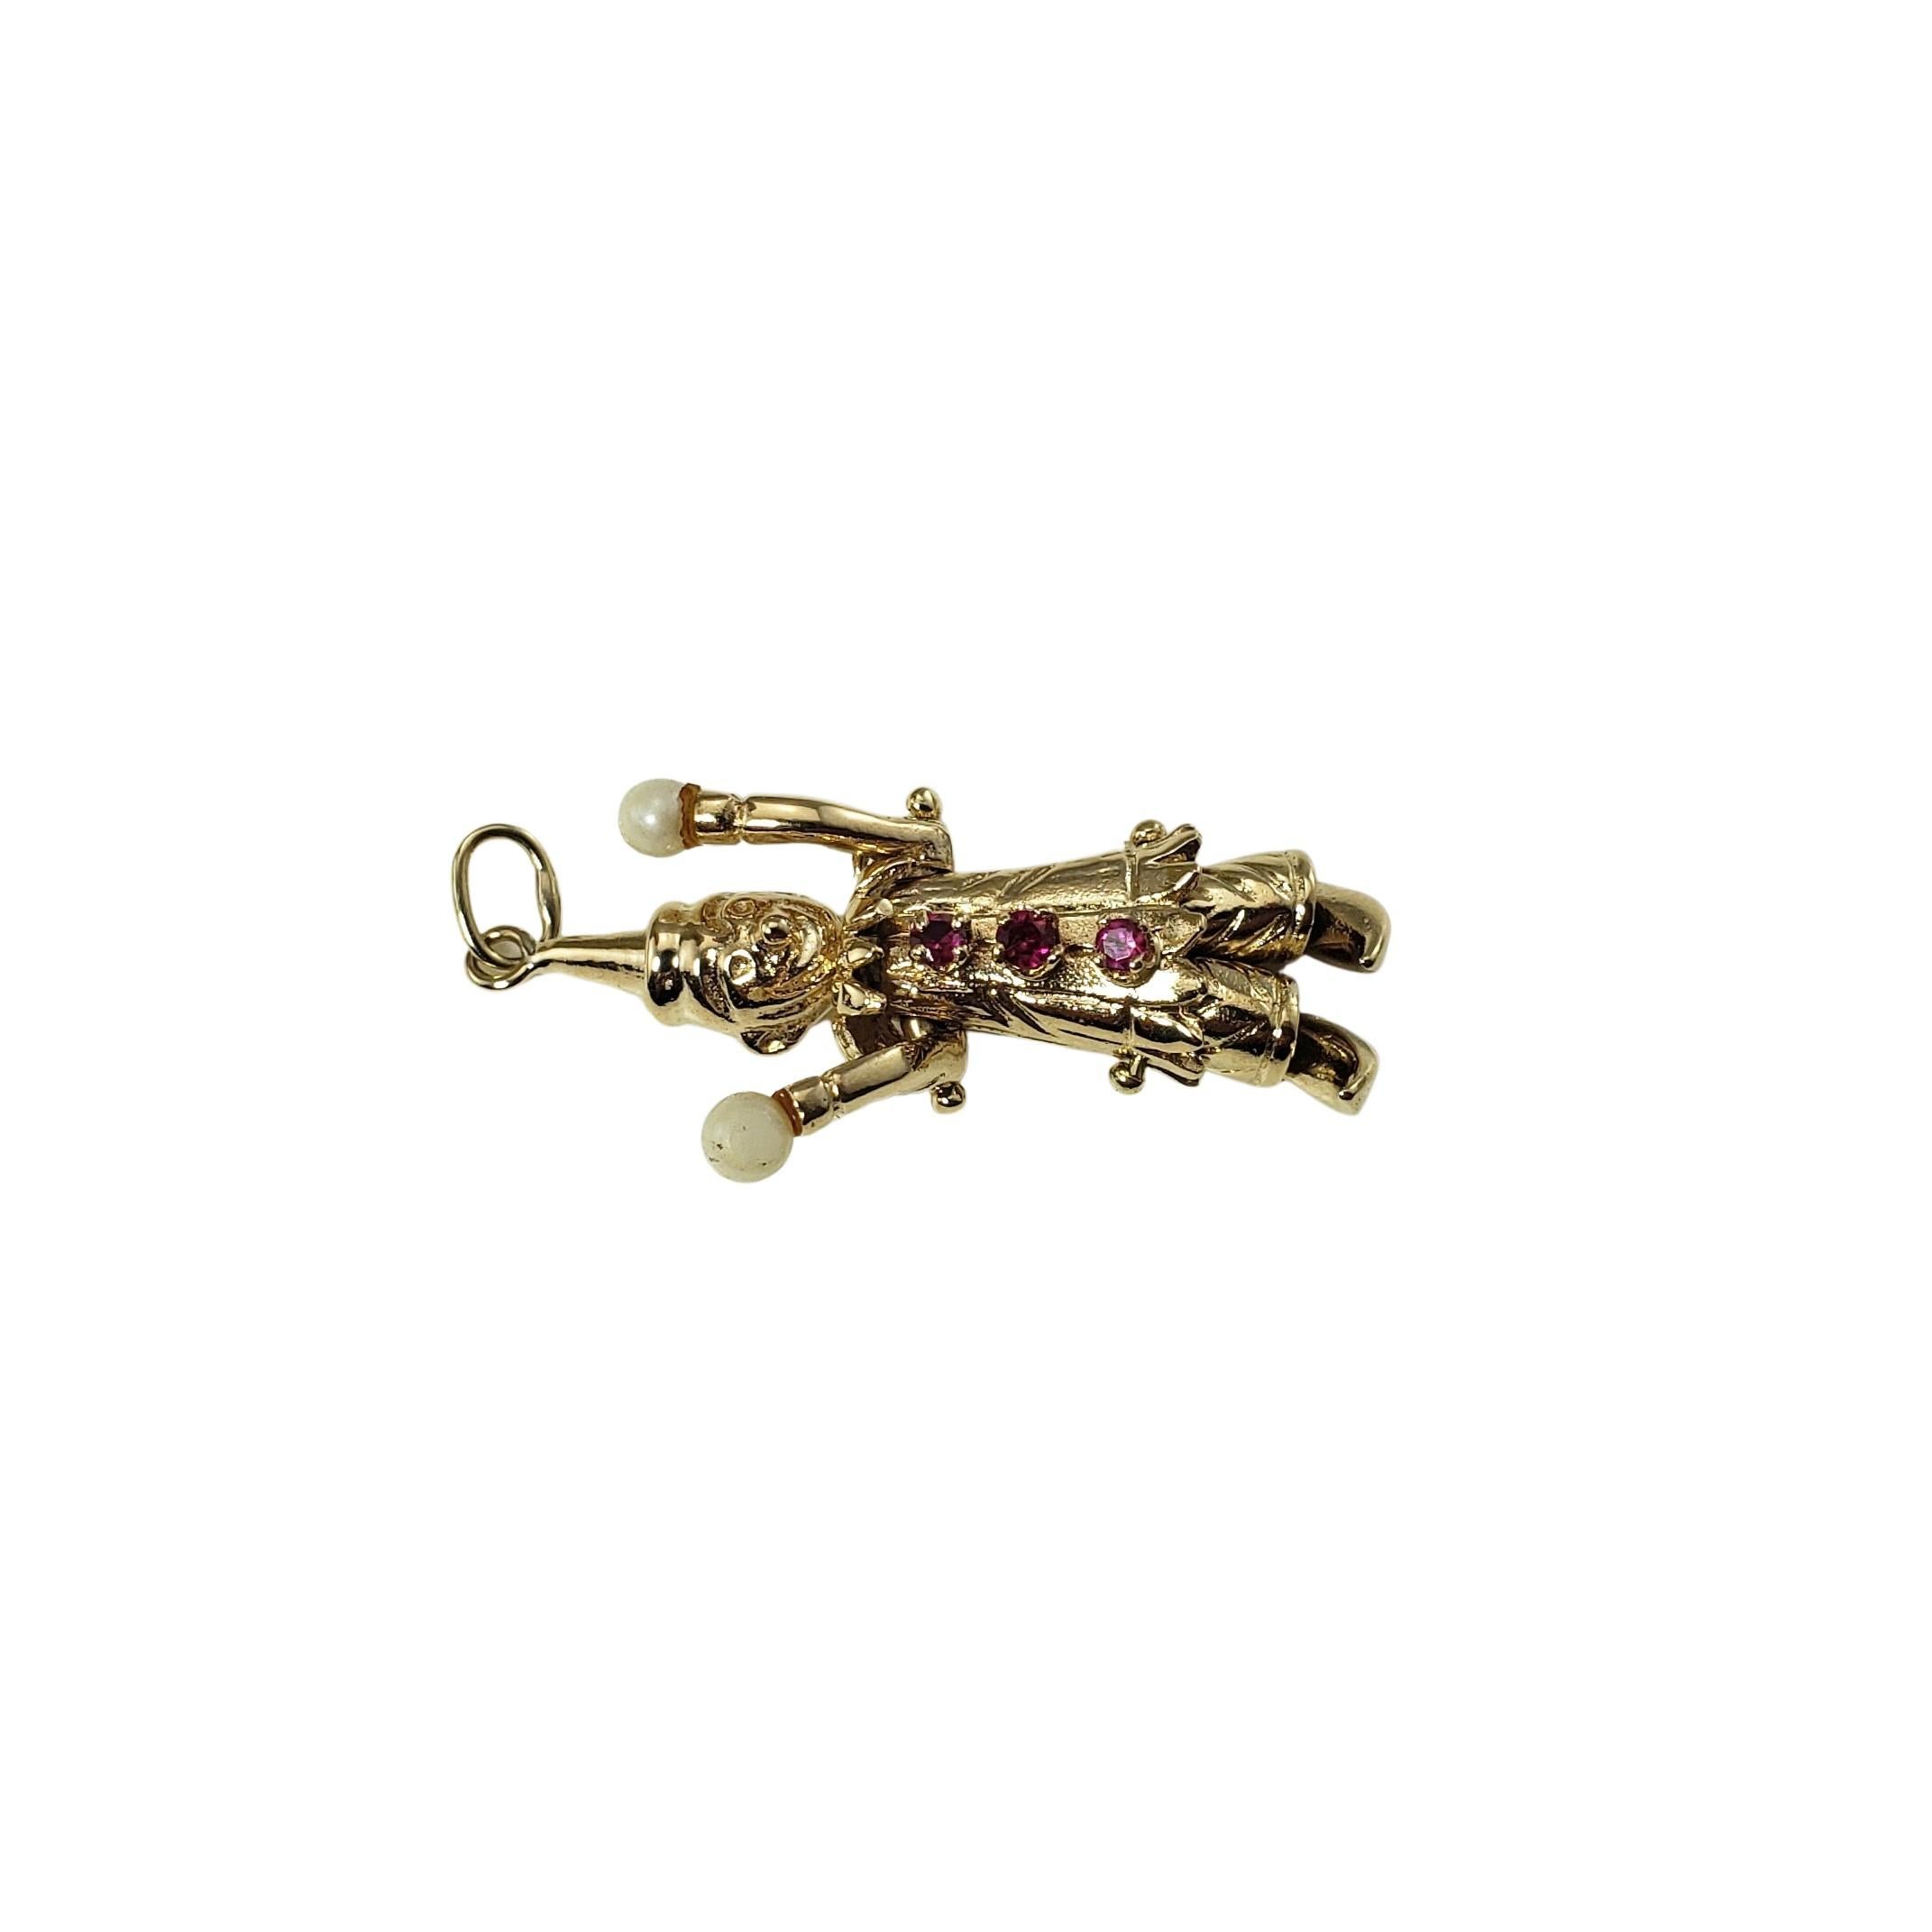 14 Karat Yellow Gold Articulated Clown Charm-

This articulated 3D clown charm is accented with three faceted red stones and two round pearls.  Beautifully detailed in 14K yellow gold.  

Size:  35 mm x 12 mm

Weight:  5.0 dwt. /  7.9gr.

Stamped: